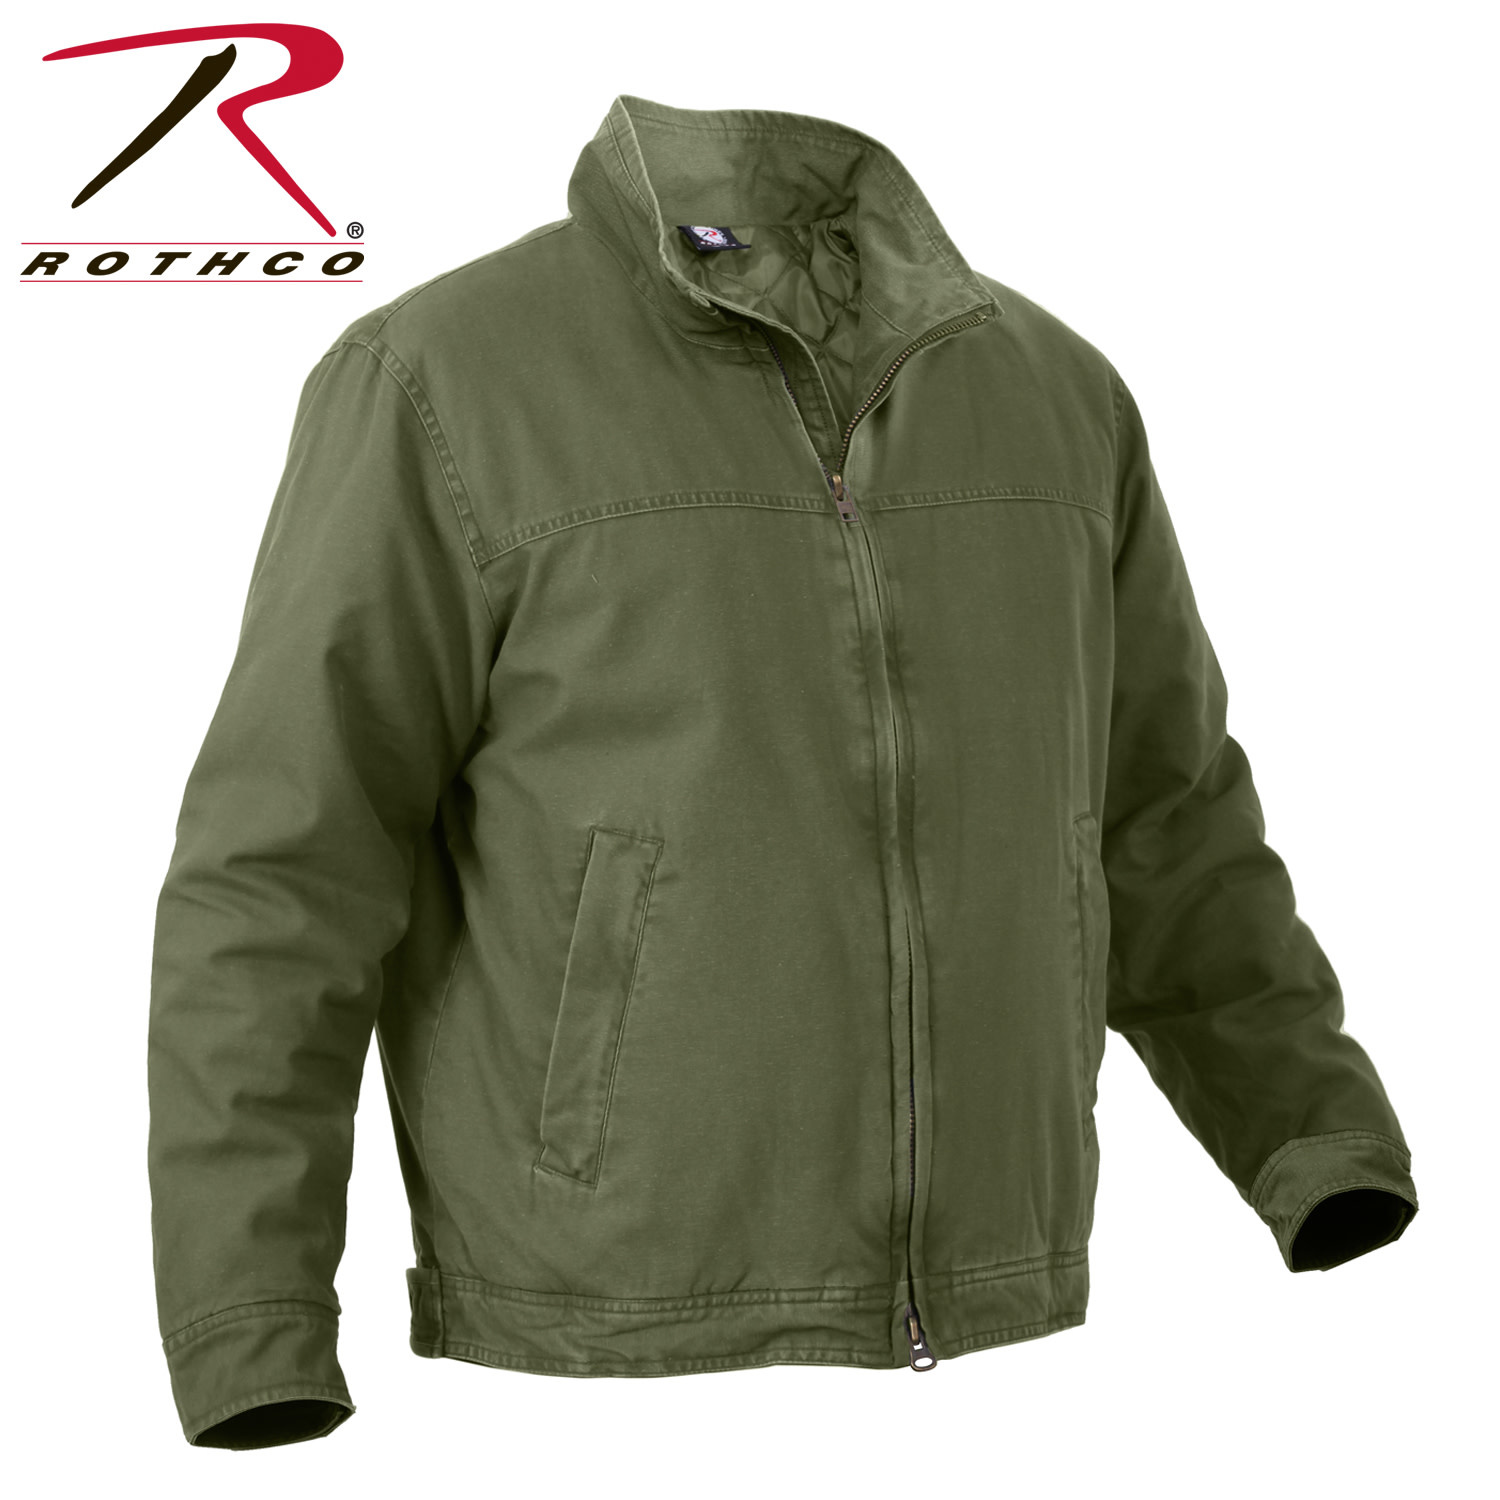 Rothco 3 Season Concealed Carry Jacket - Army Supply Store Military